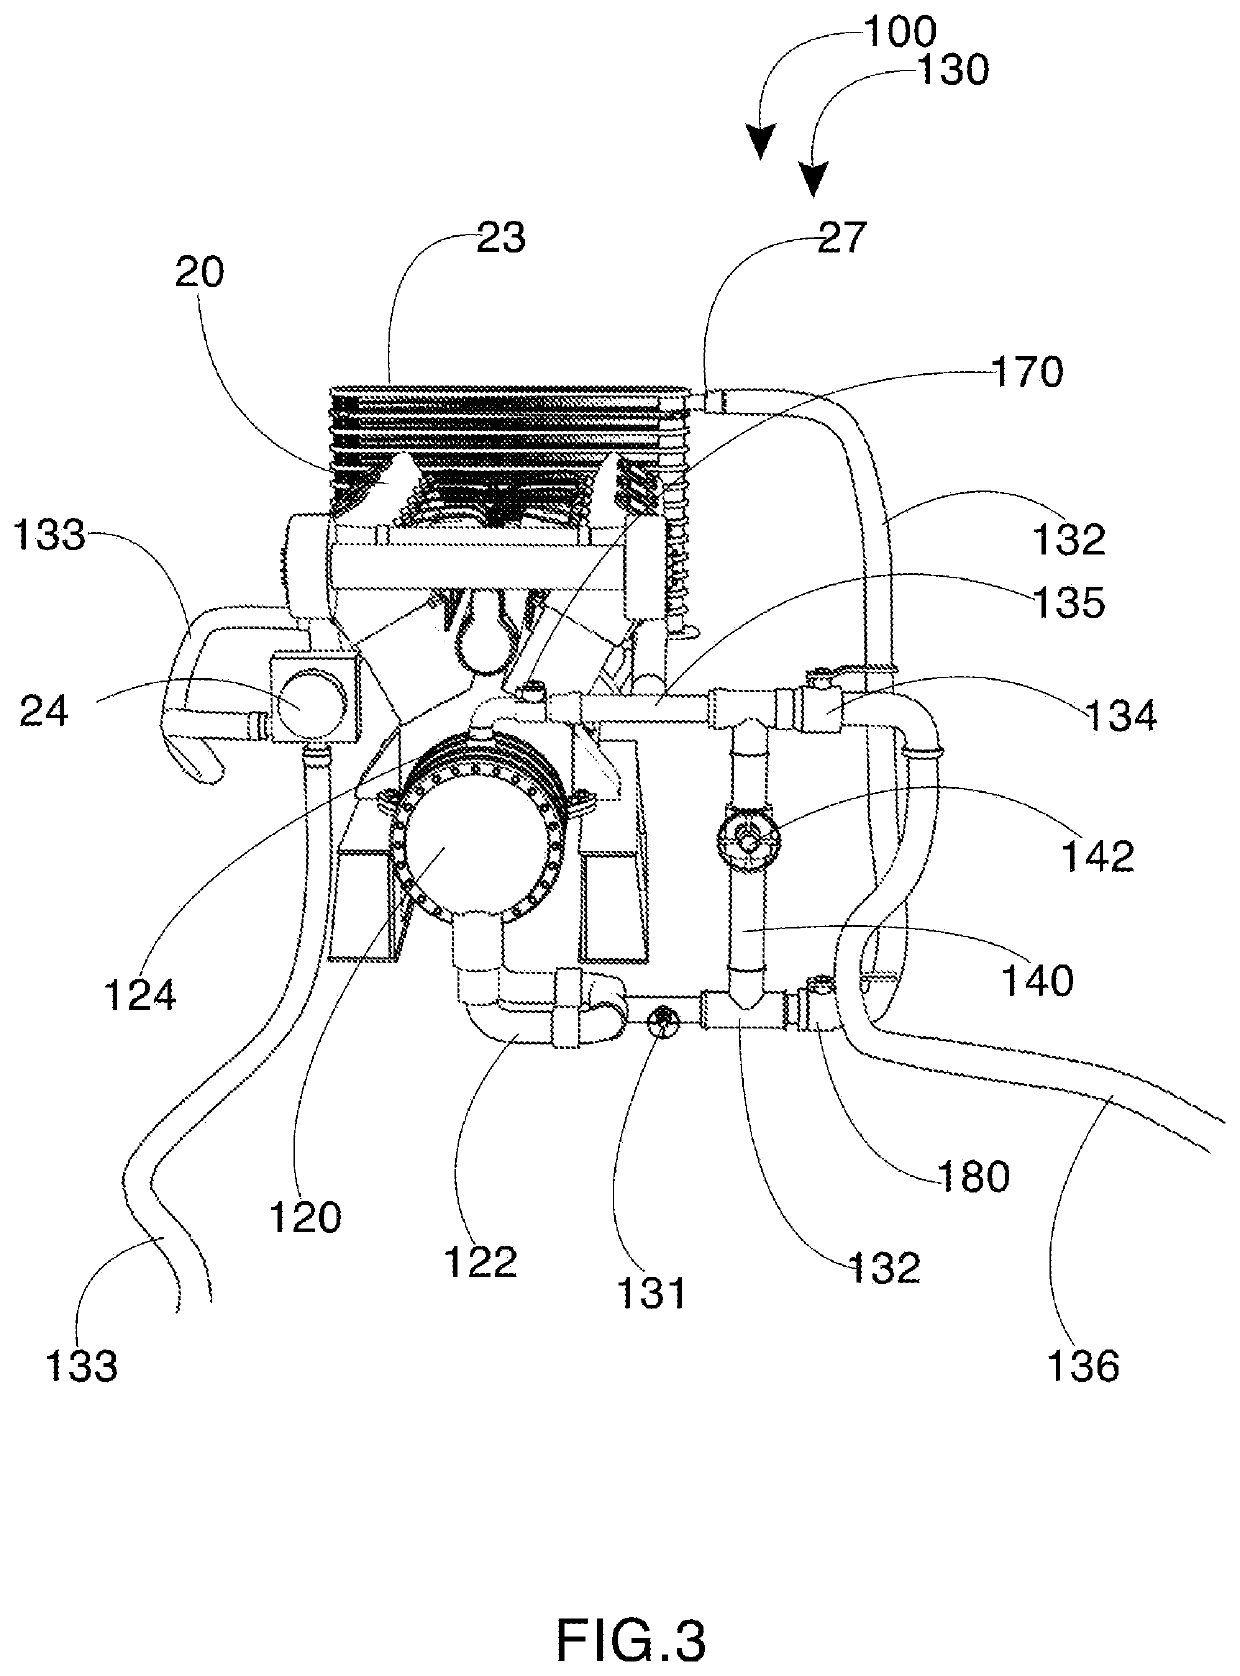 System and methods for testing an engine